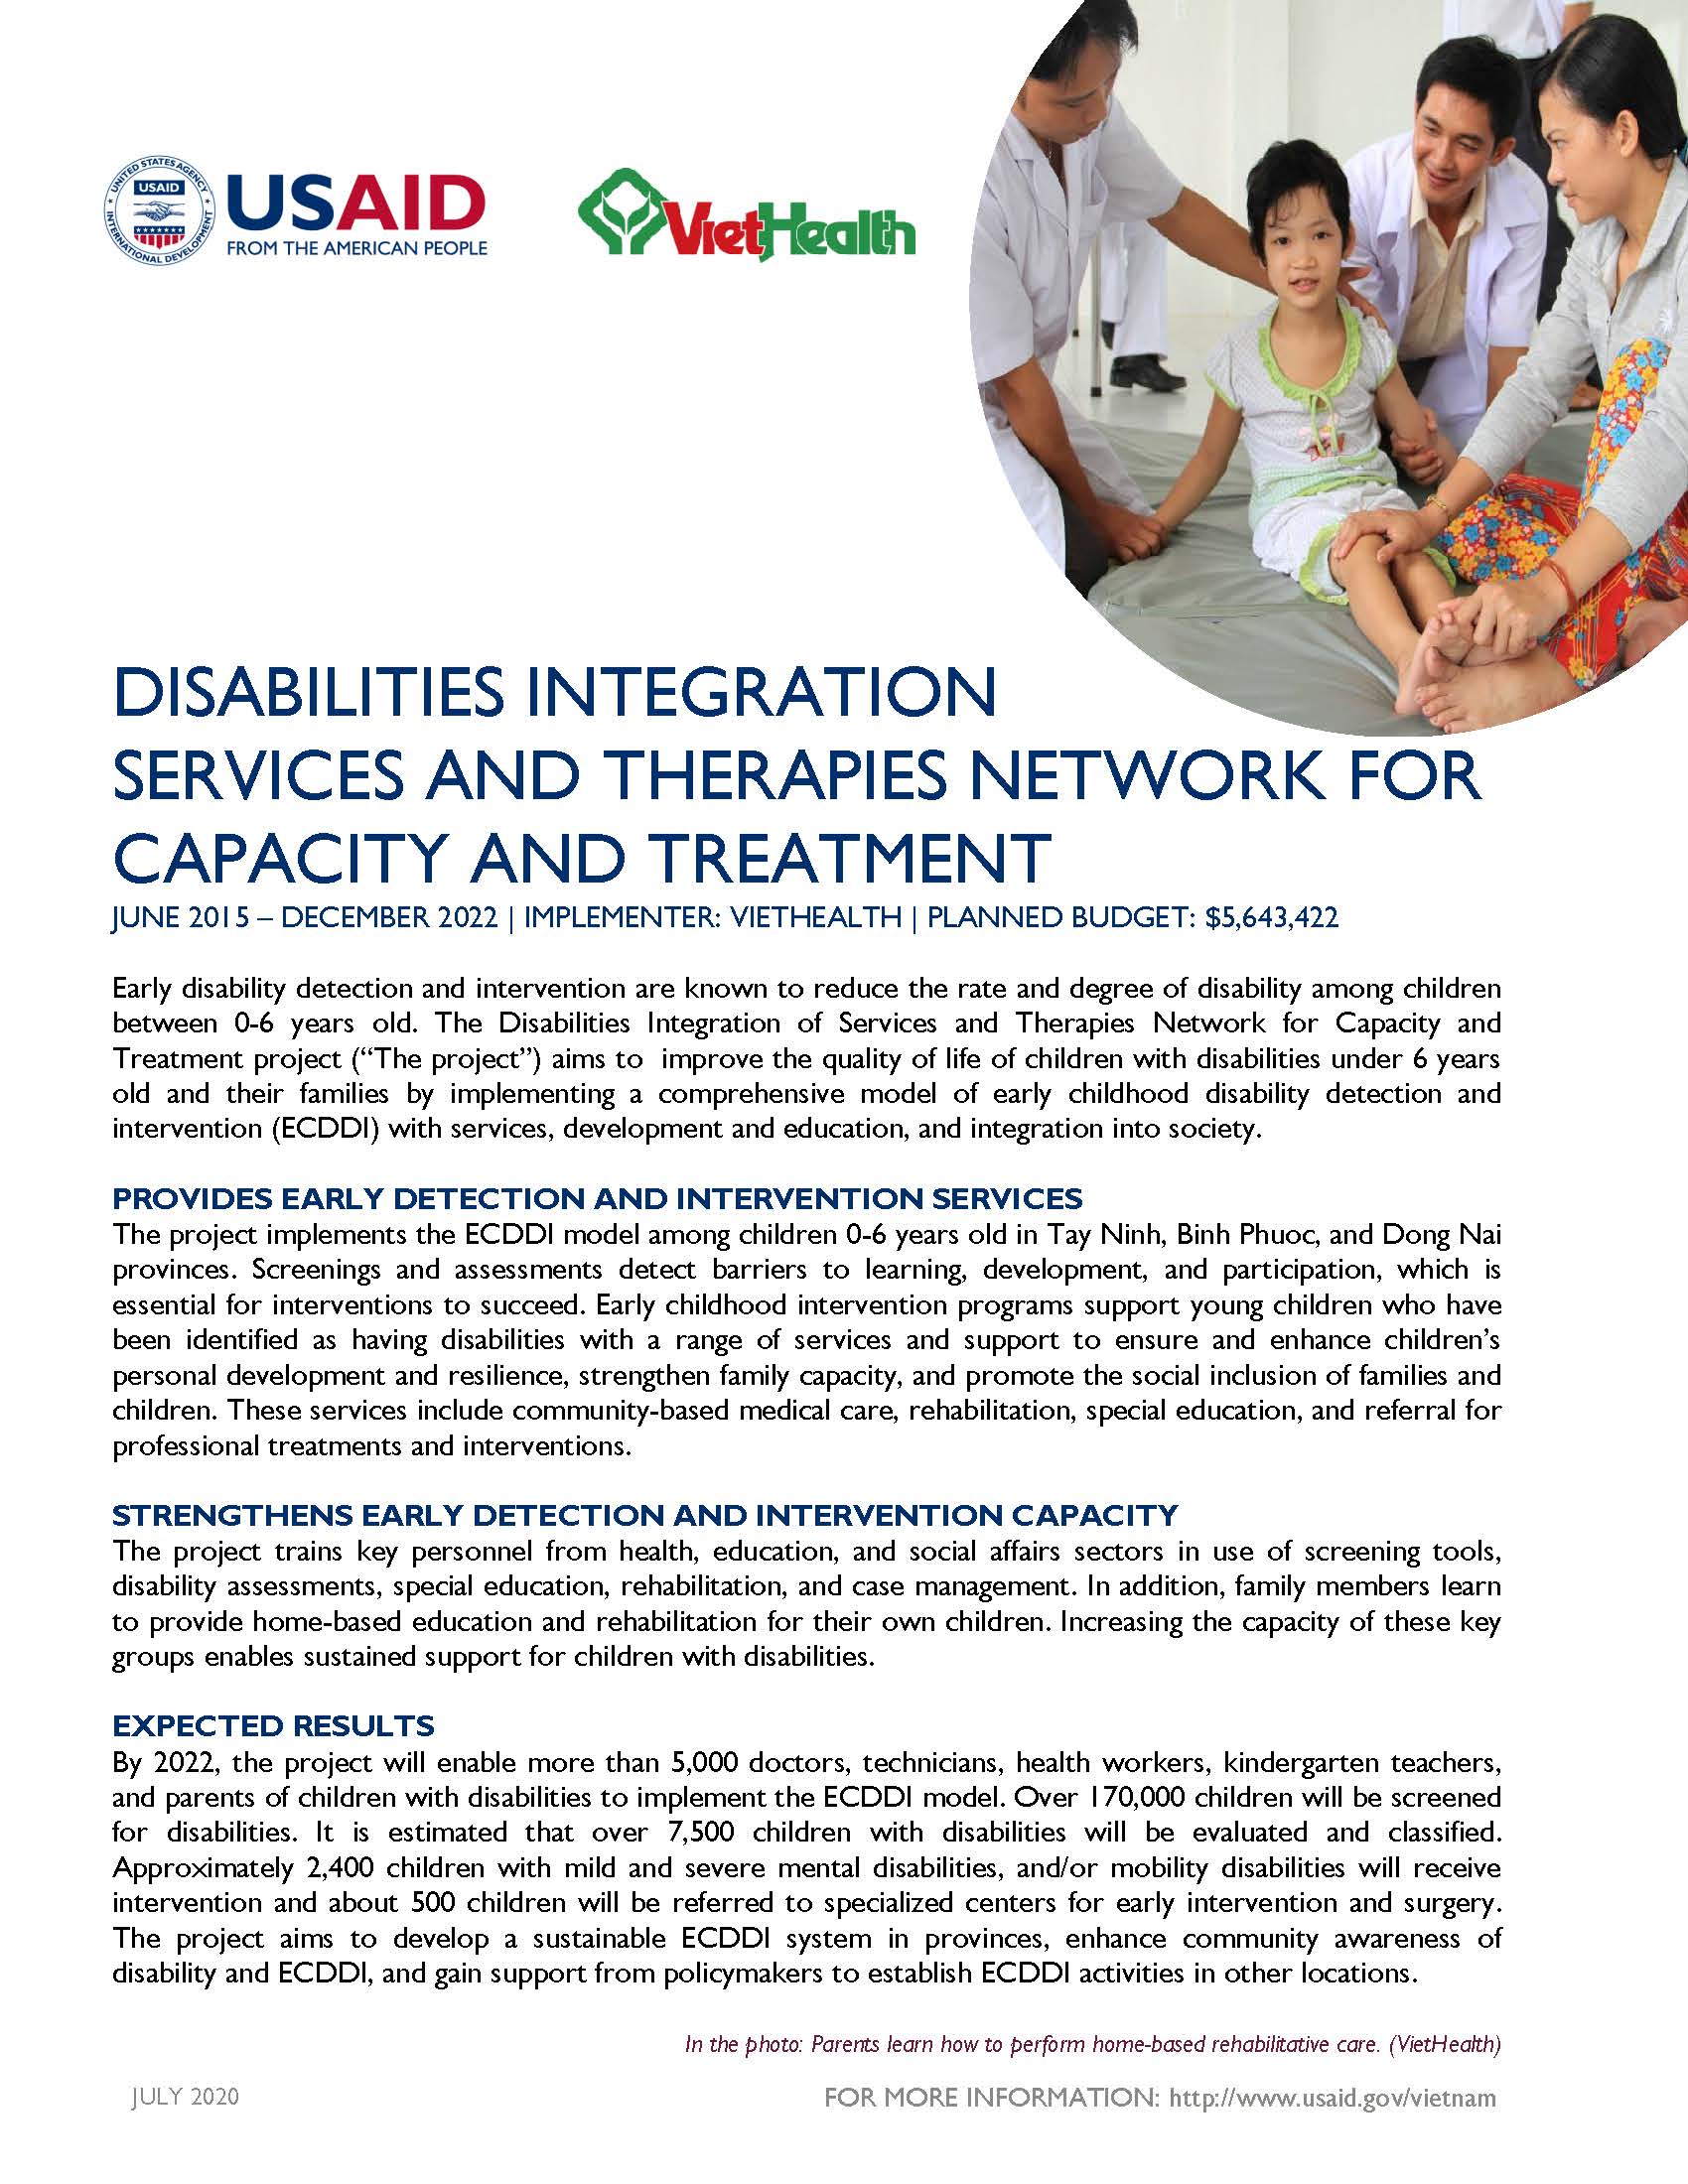 Fact Sheet: Disabilities Integration of Services and Therapies Network for Capacity and Treatment project